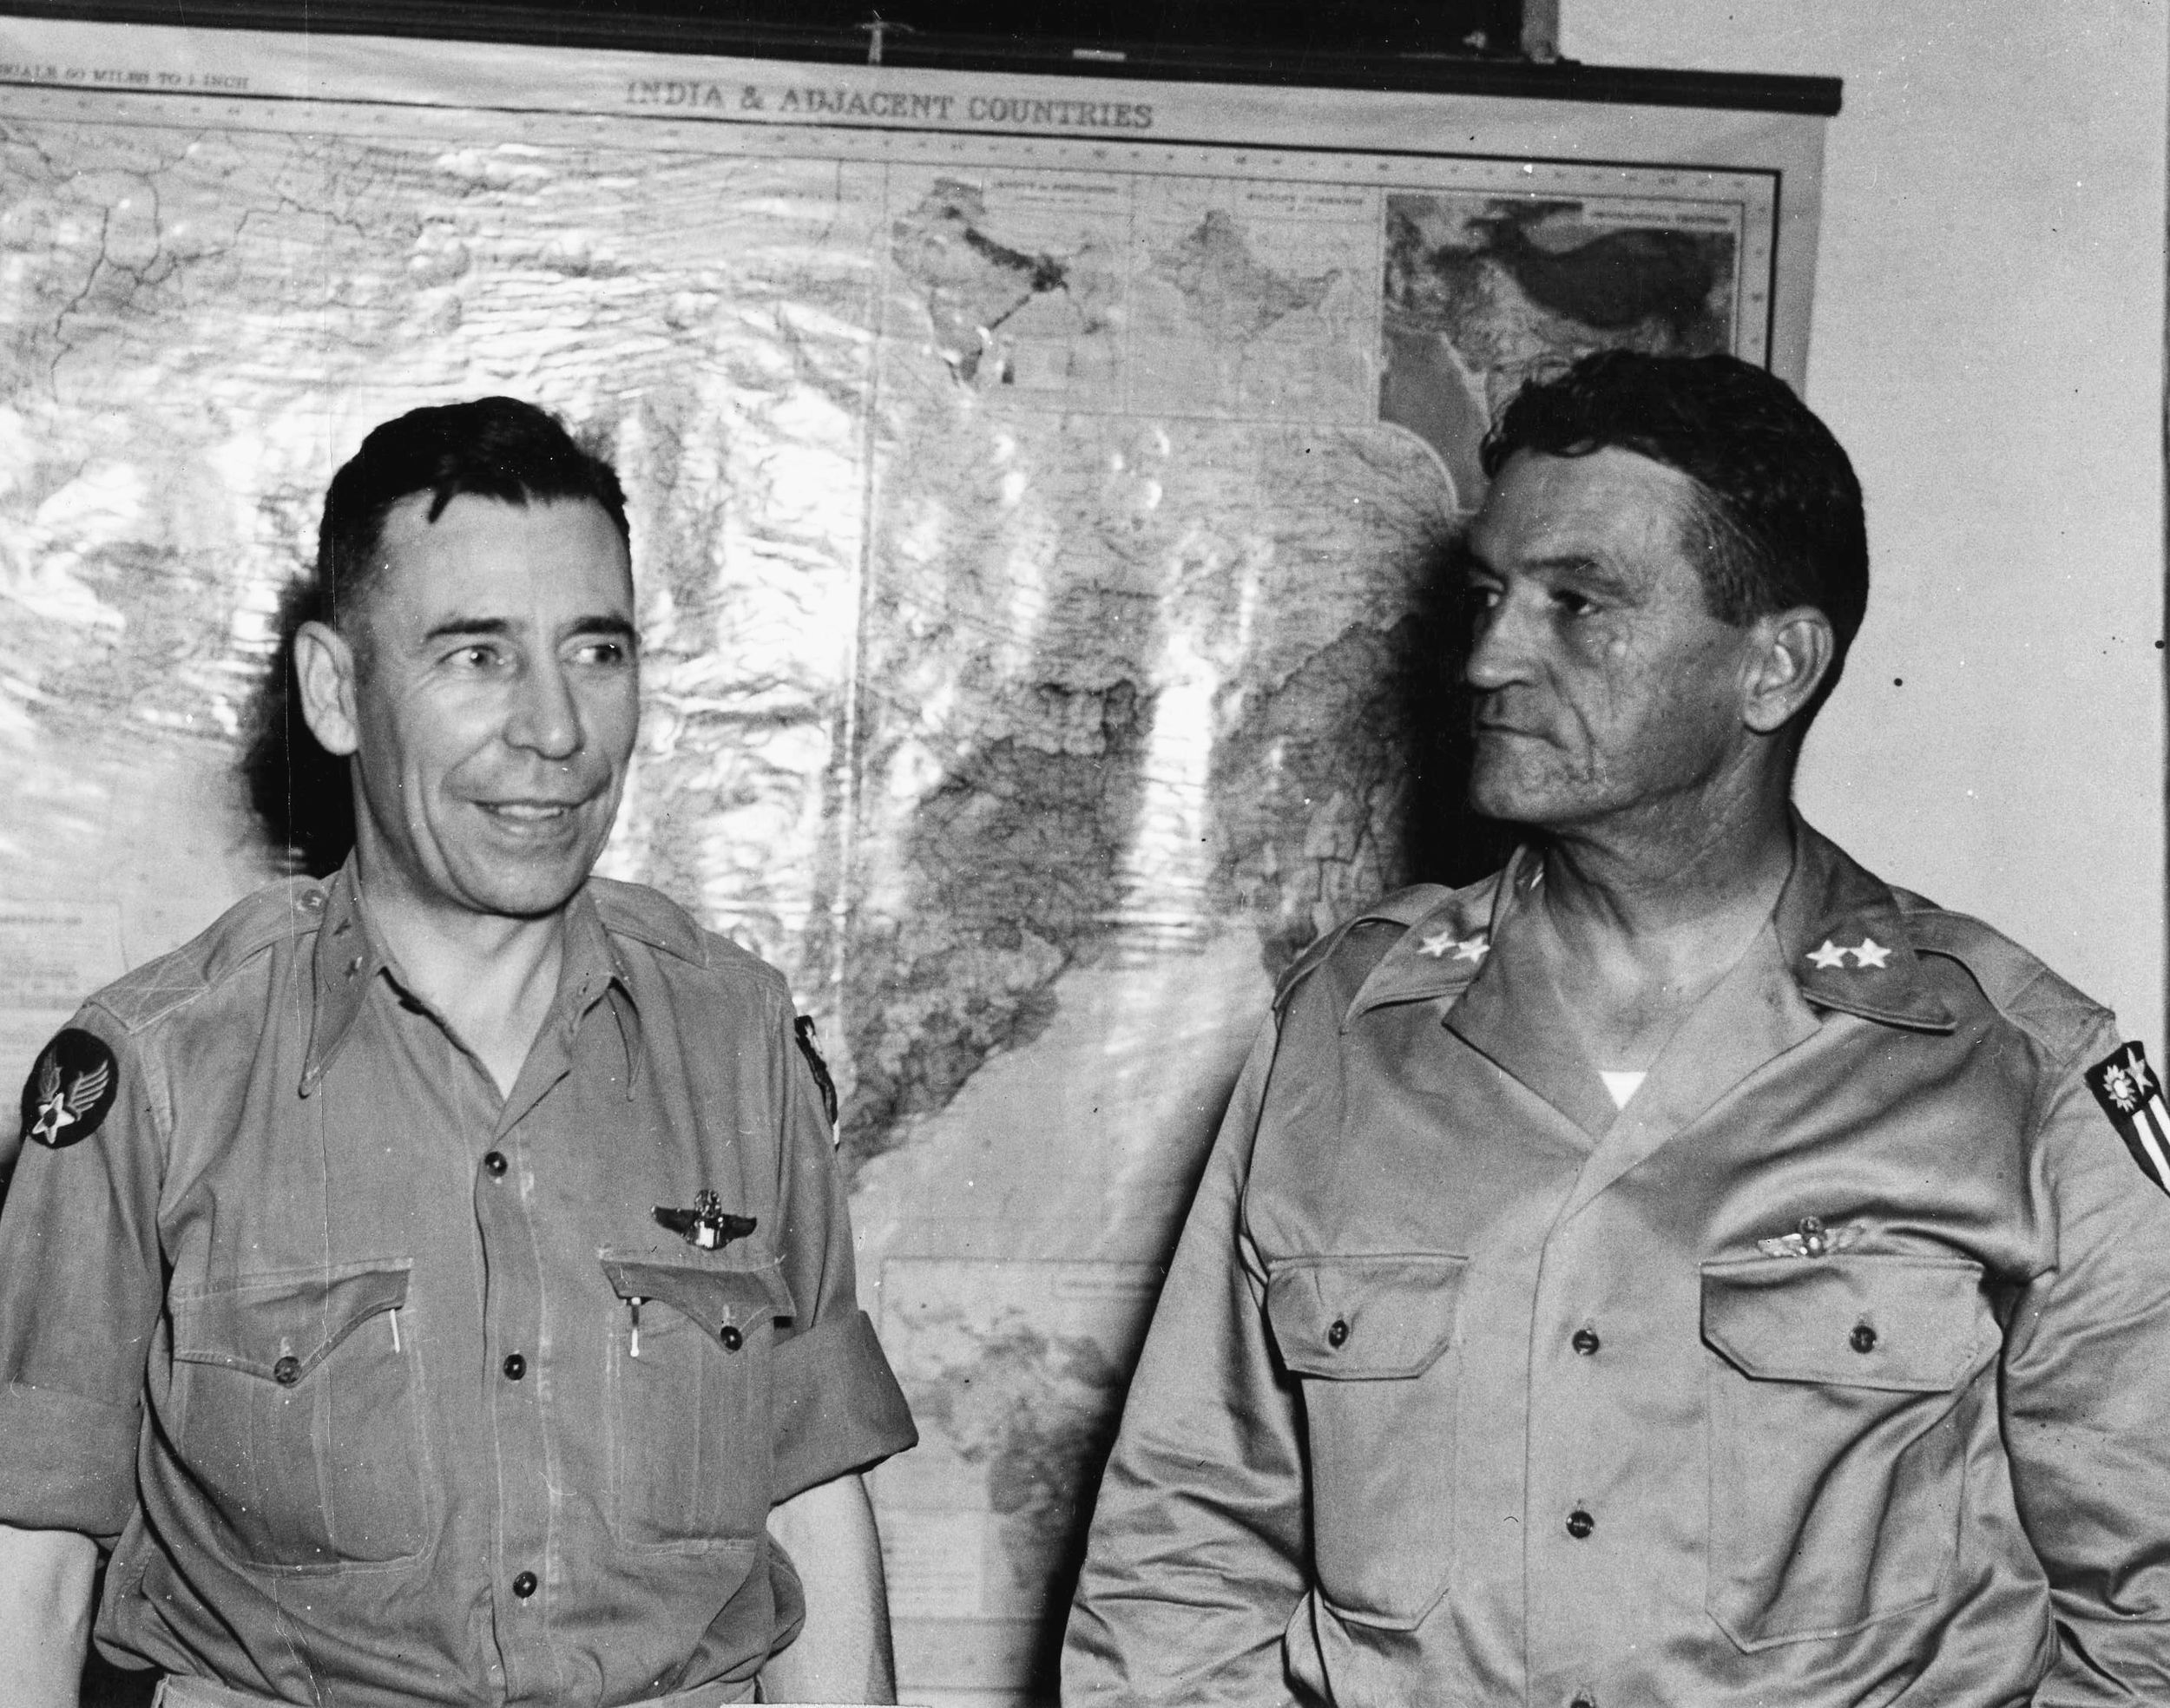 Major General Clayton Bissell (left), commander of the U.S. Tenth Air Force, and Major General Claire Chennault (right) were bitter rivals. This meeting at Tenth Air Force headquarters in Delhi, India, was strained.